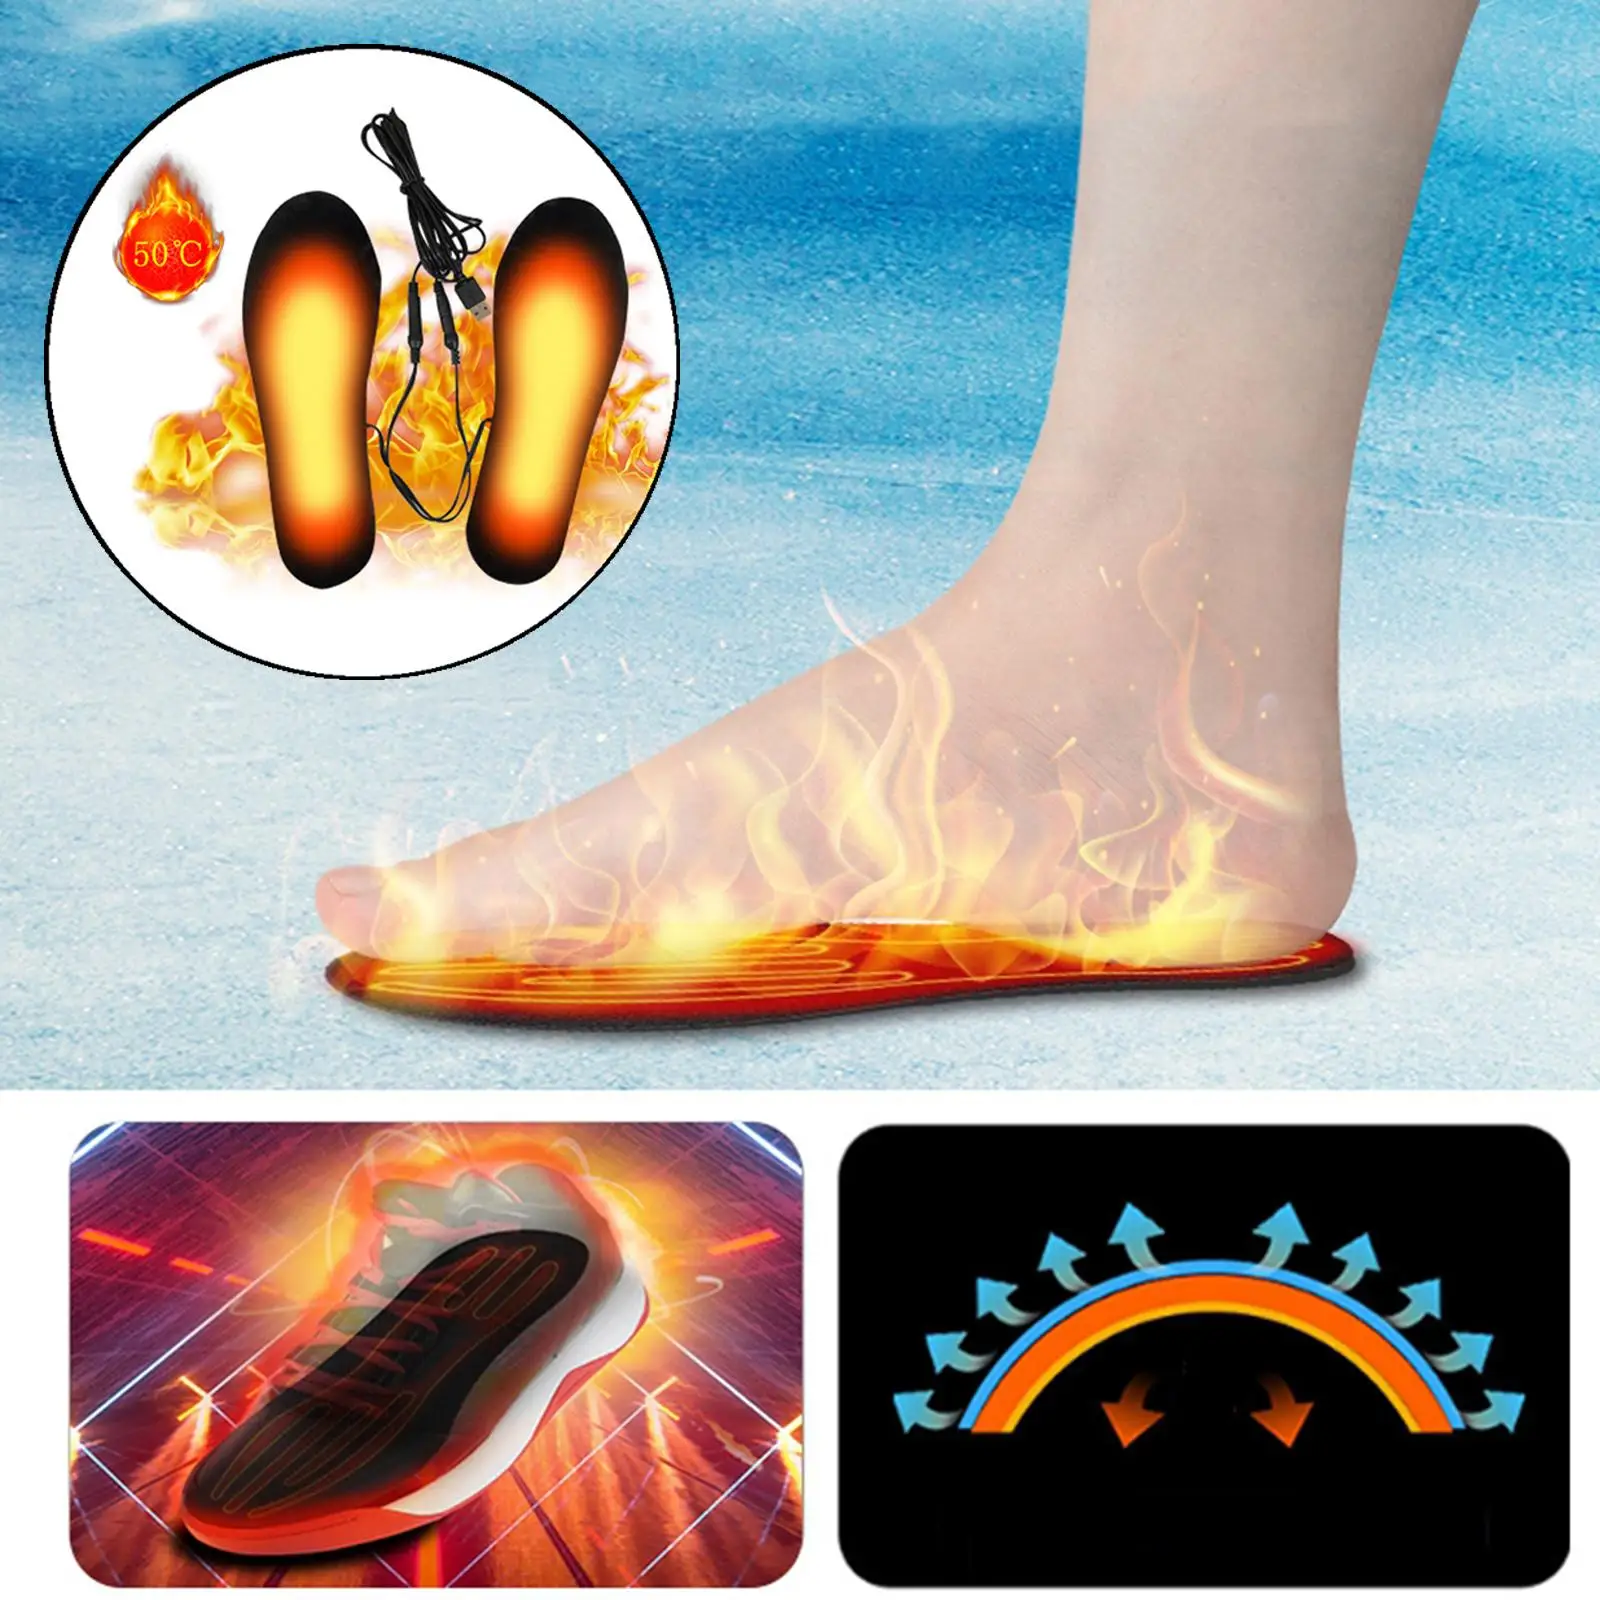 USB Electric Heated Shoe Insoles Free to Cut Warmer Feet Heater Washable Thermal